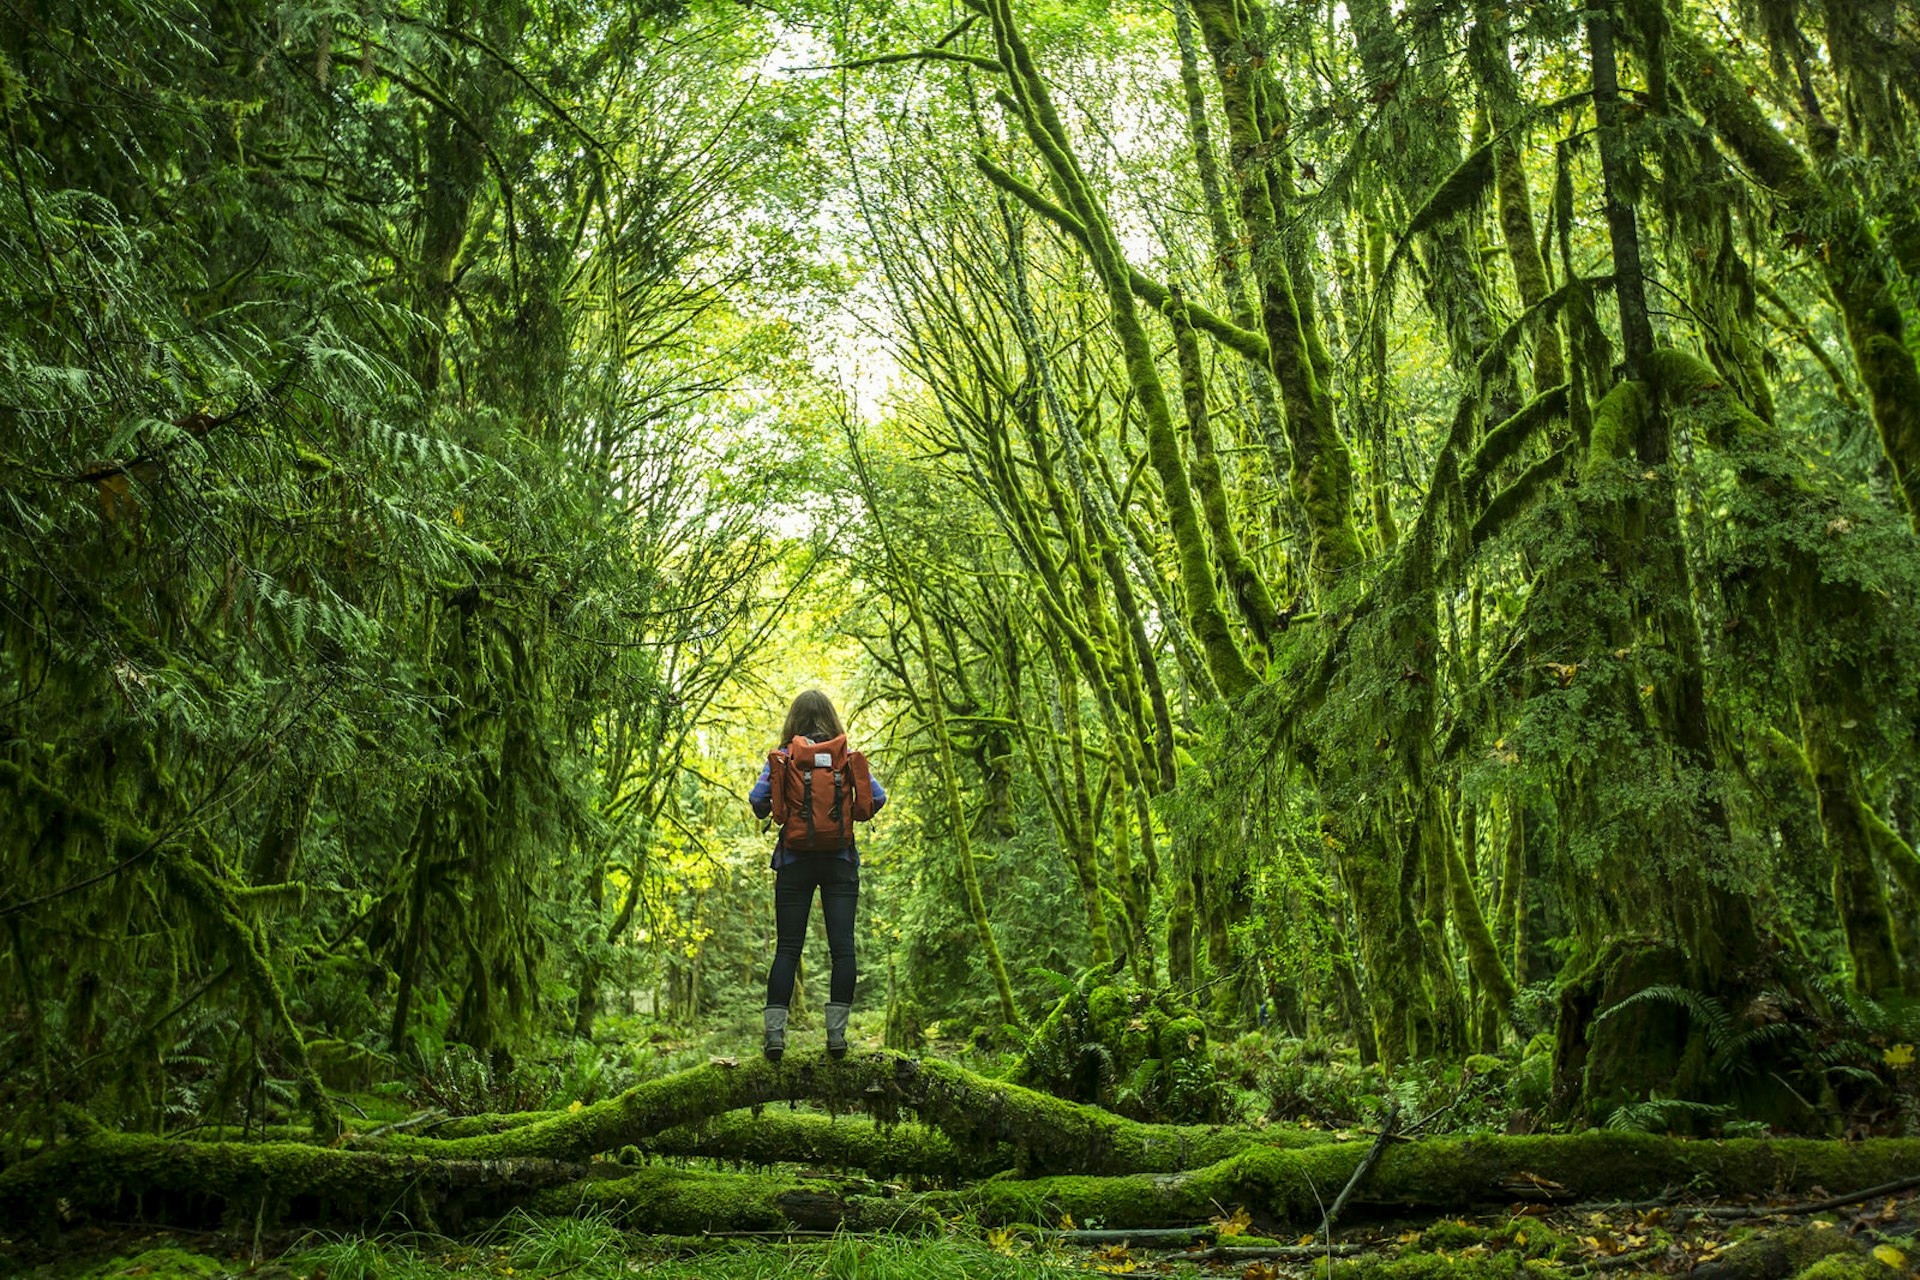 A woman wearing a bright red backpack stands on top of a fallen tree branch in the middle of a verdant green forest